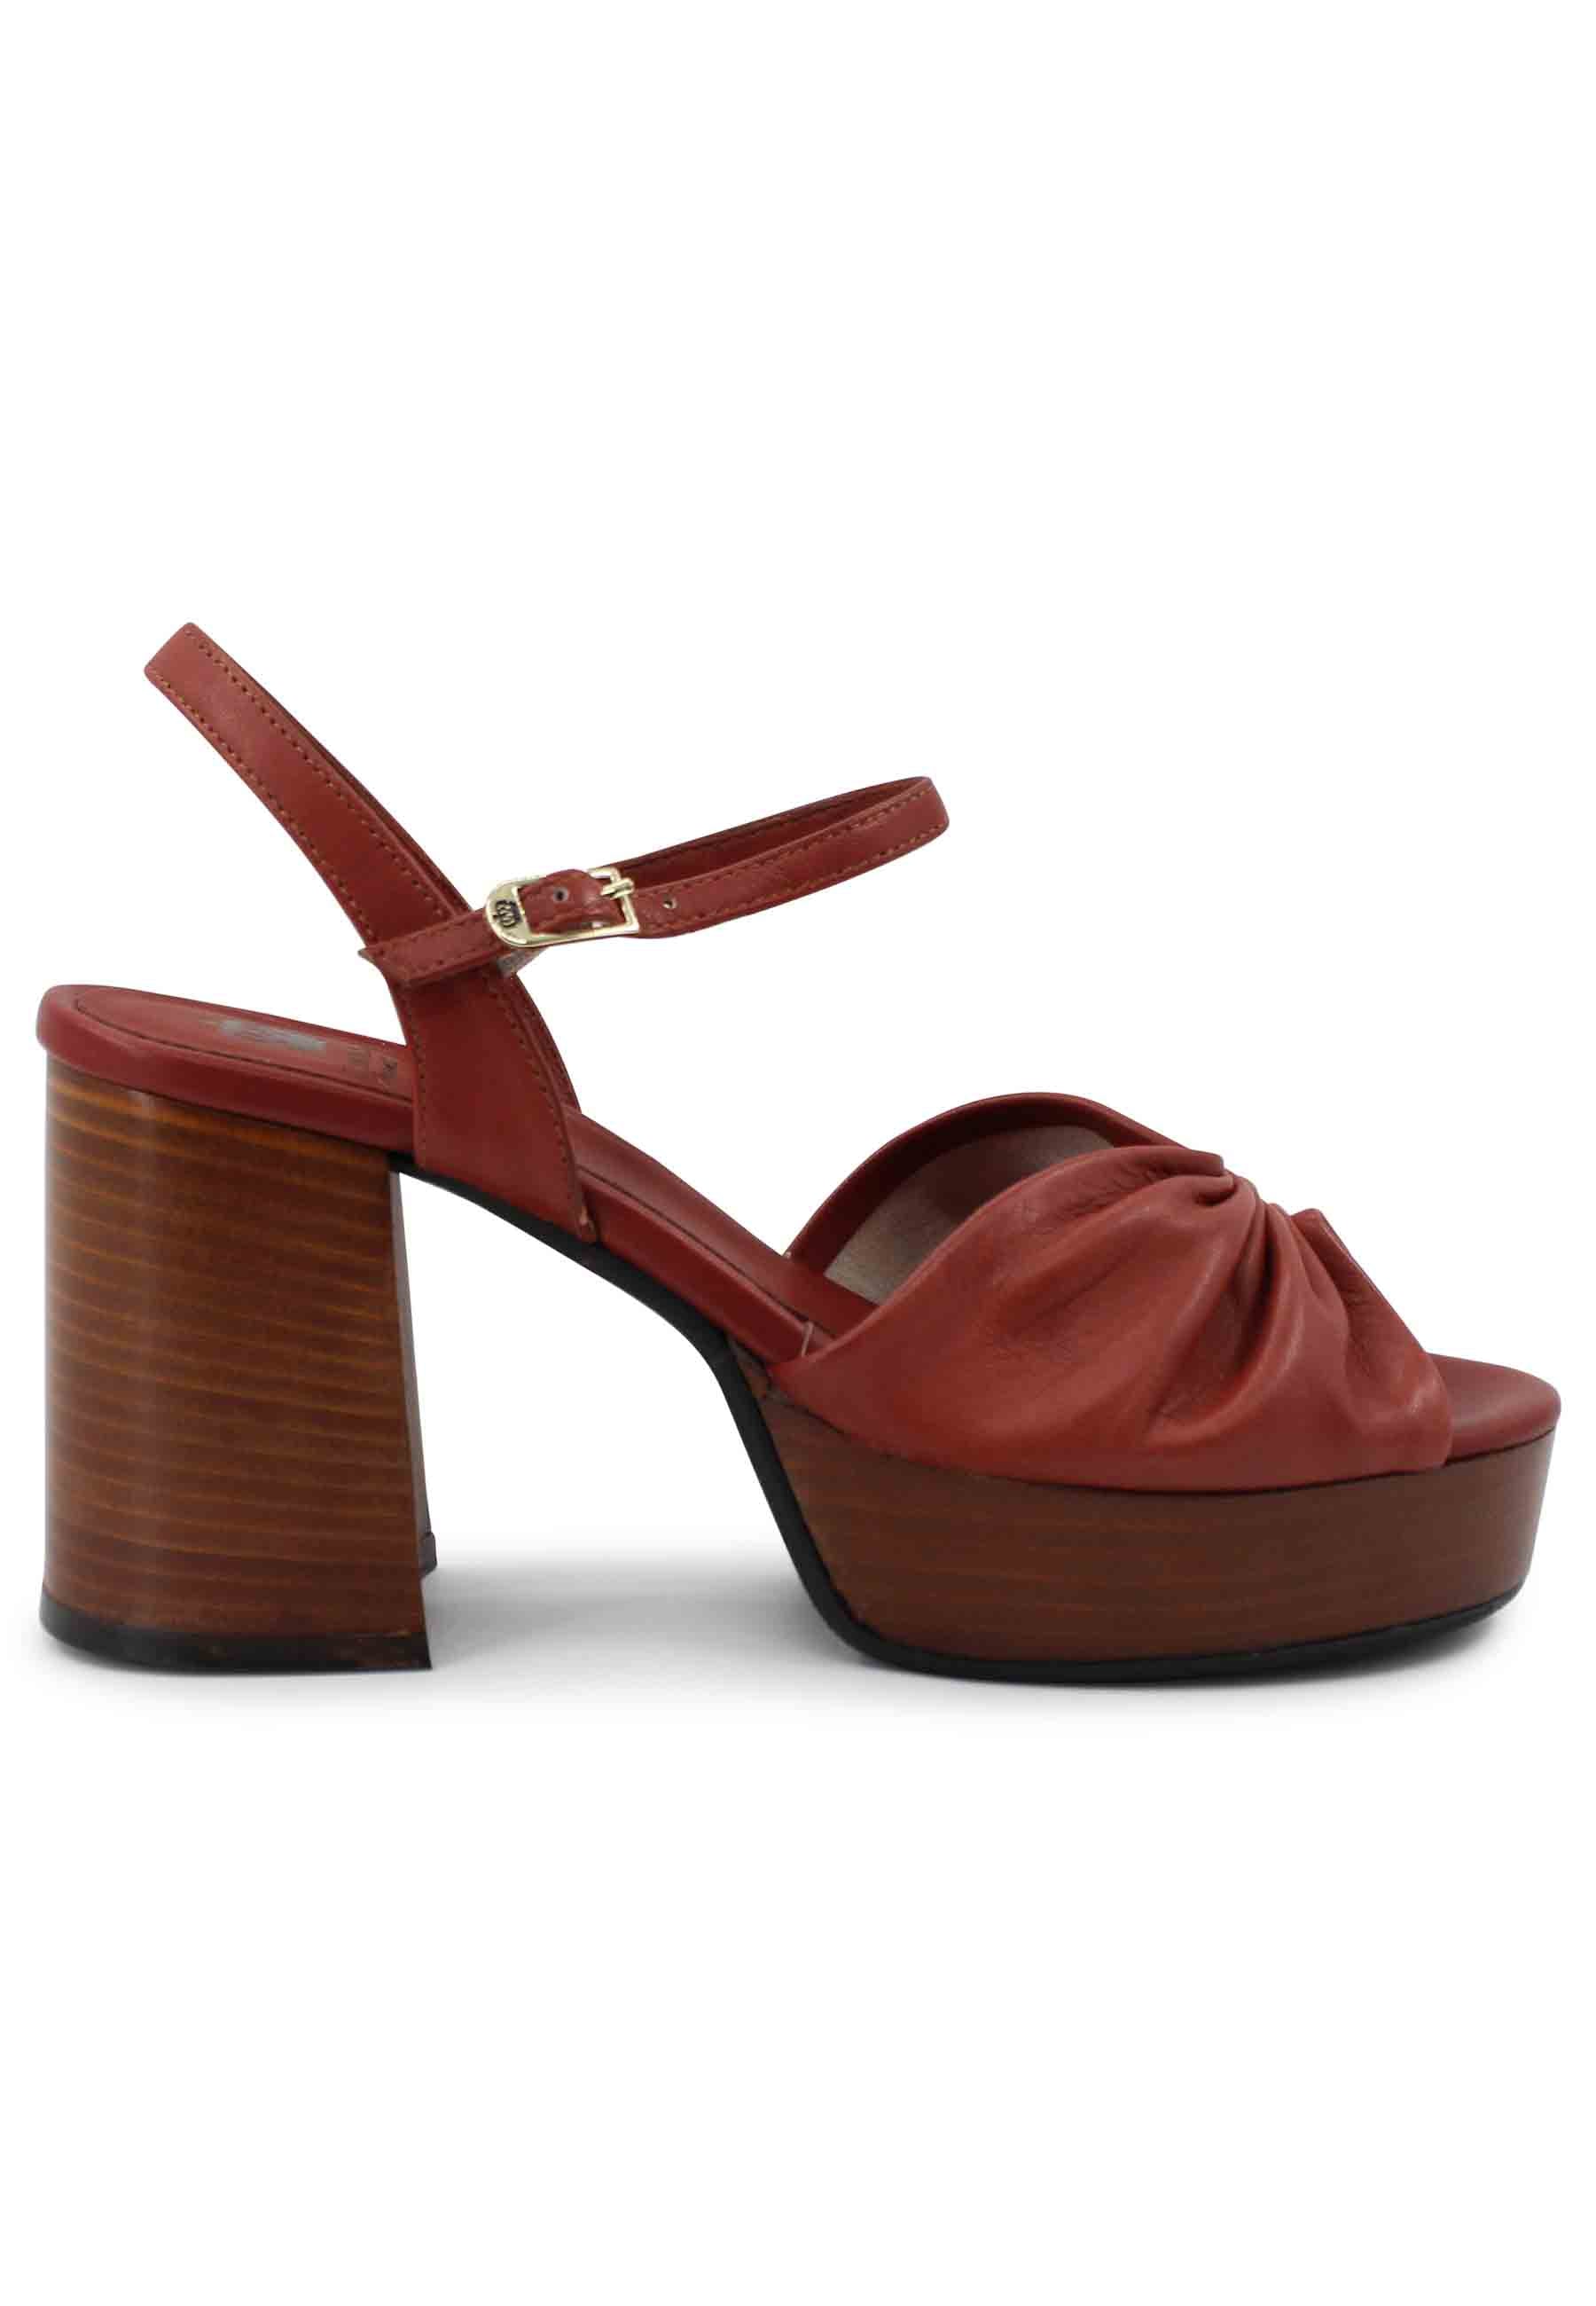 Women's sandals in brick leather with leather heel and platform